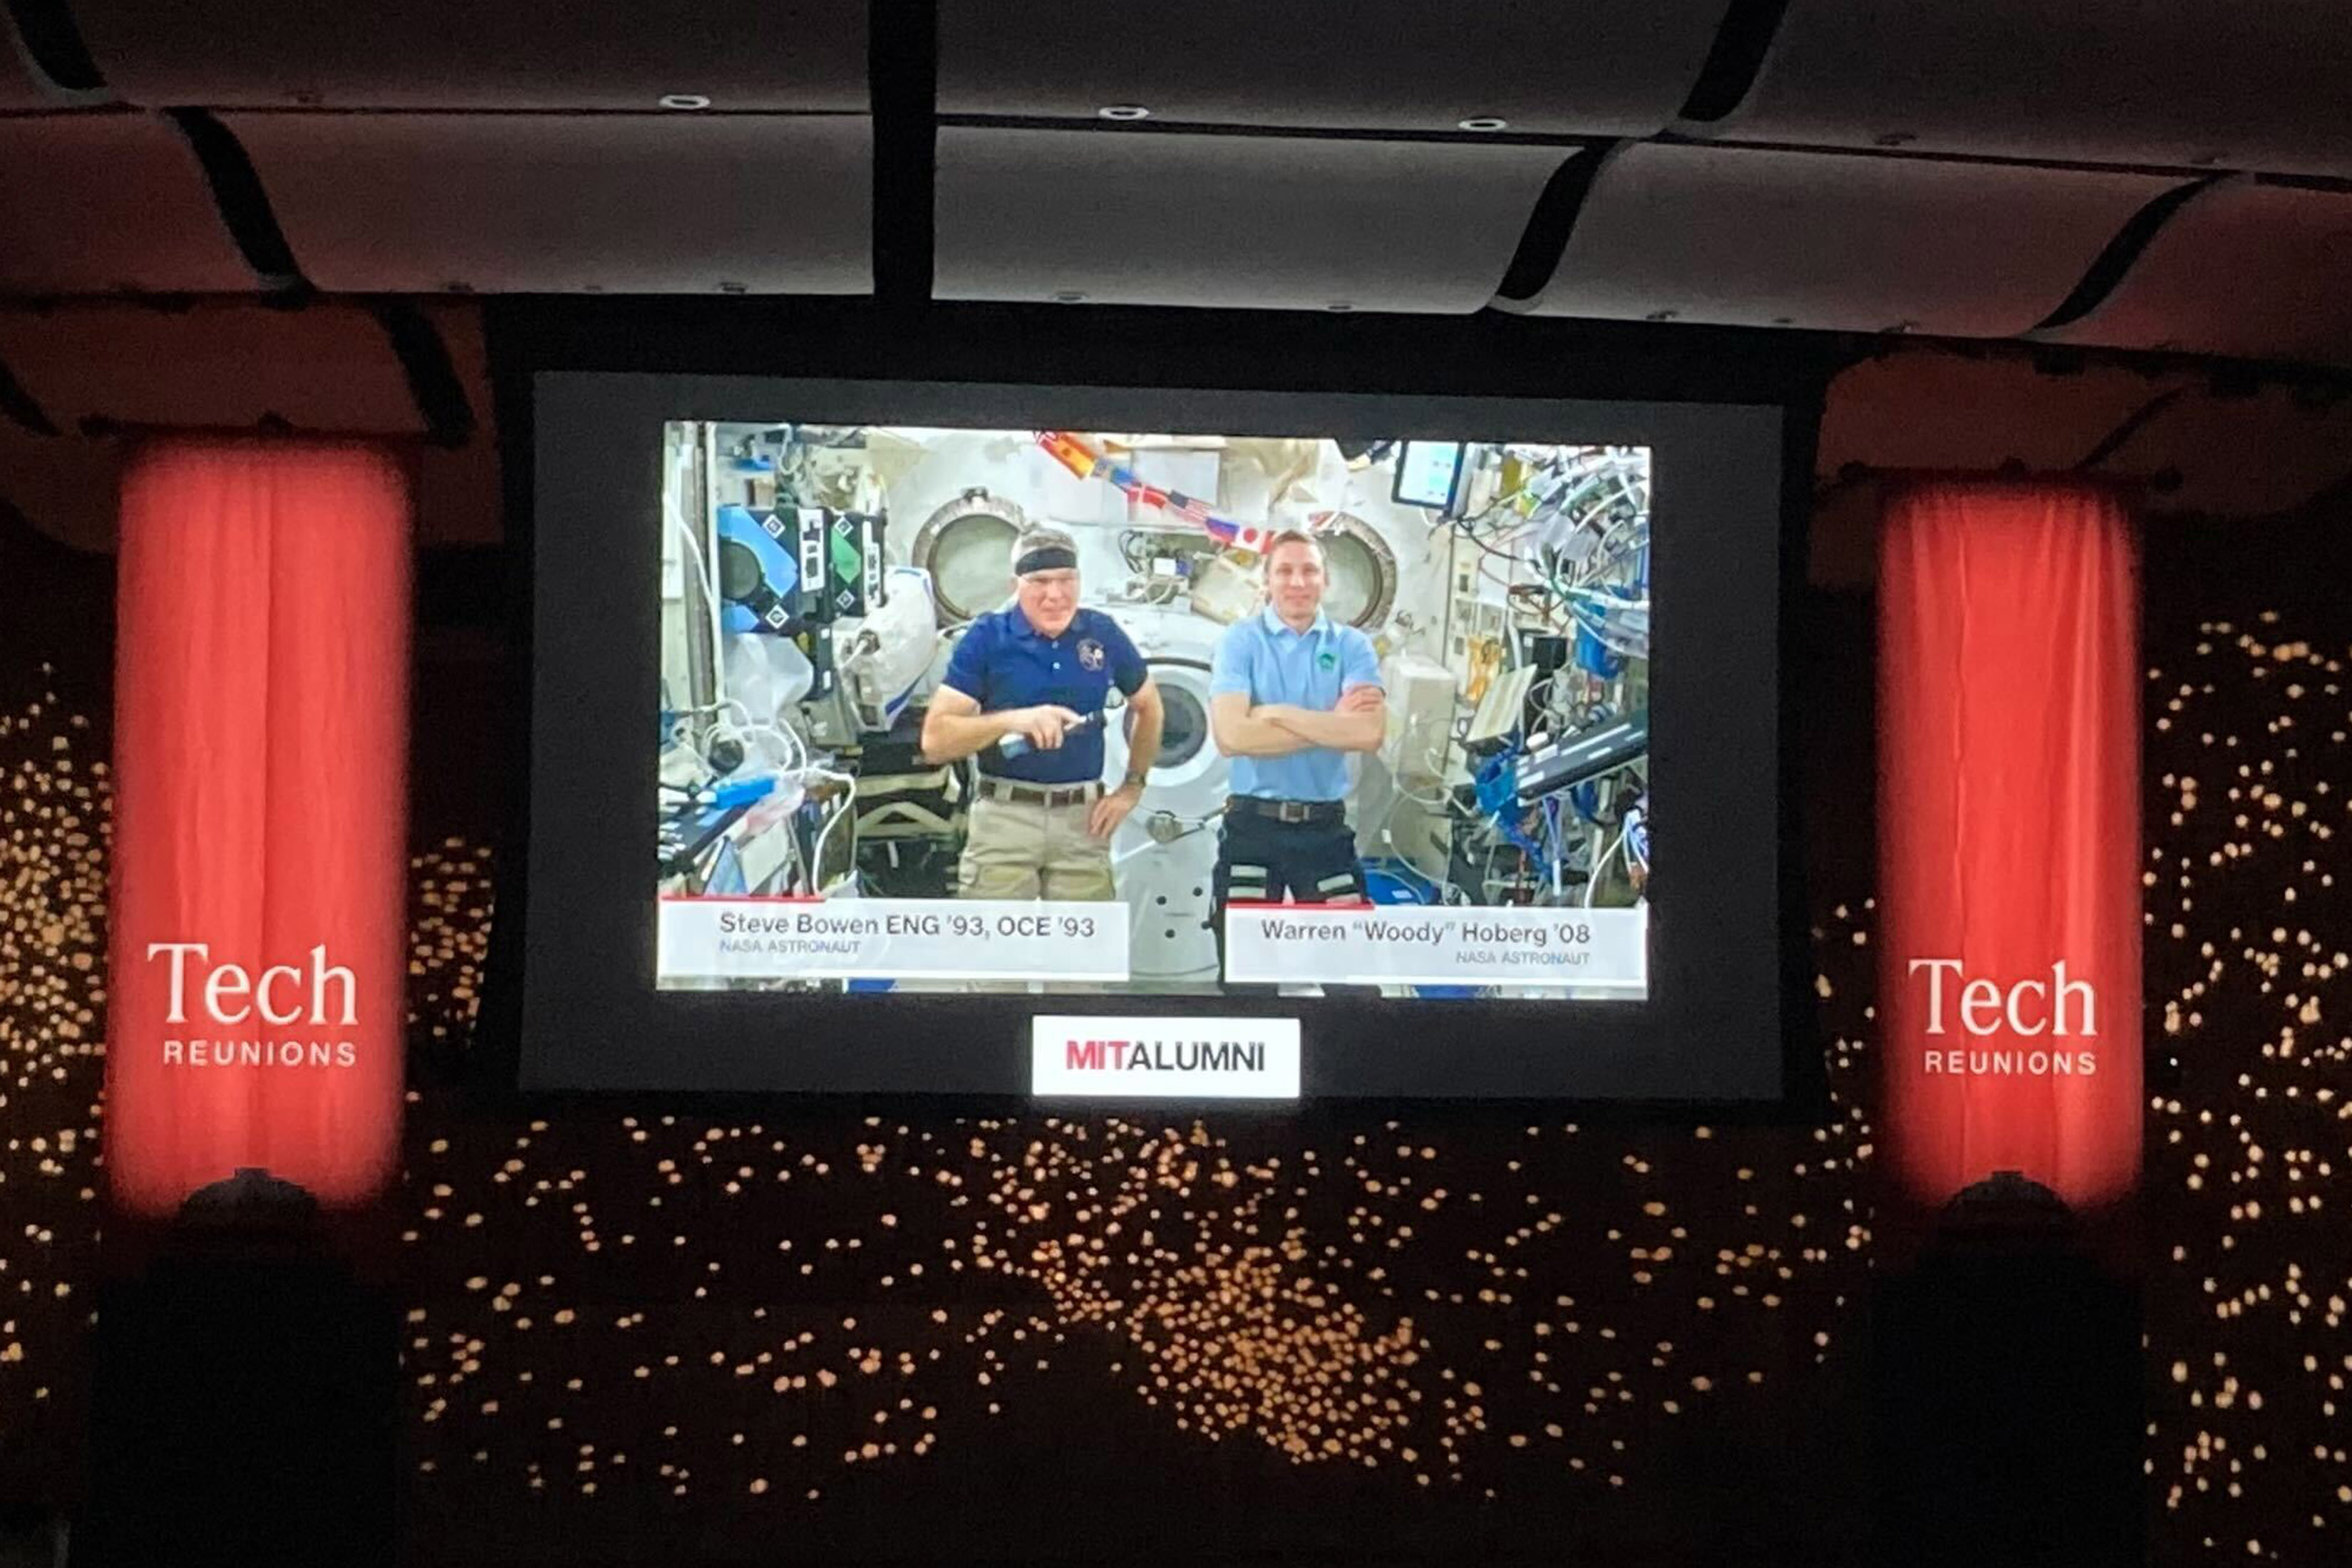 Astronauts Stephen Bowen ’93 and Warren “Woody” Hoburg ’08 are shown onscreen with Tech Day banners on either side.